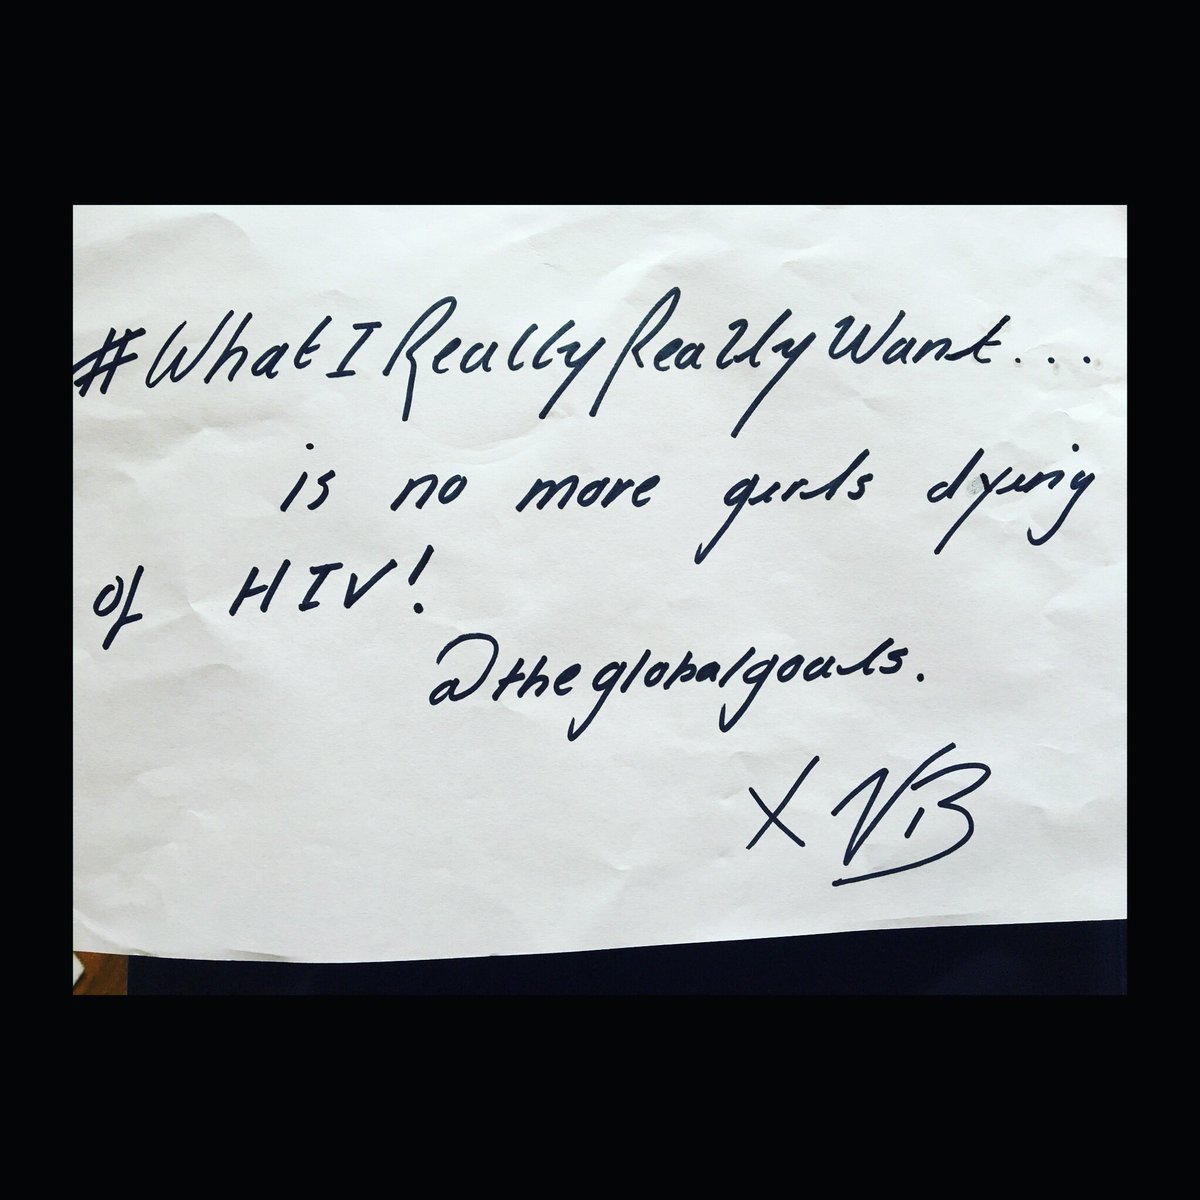 #WhatIReallyReallyWant is no more girls dying of HIV @TheGlobalGoals X vb https://t.co/mFza6cHyBx